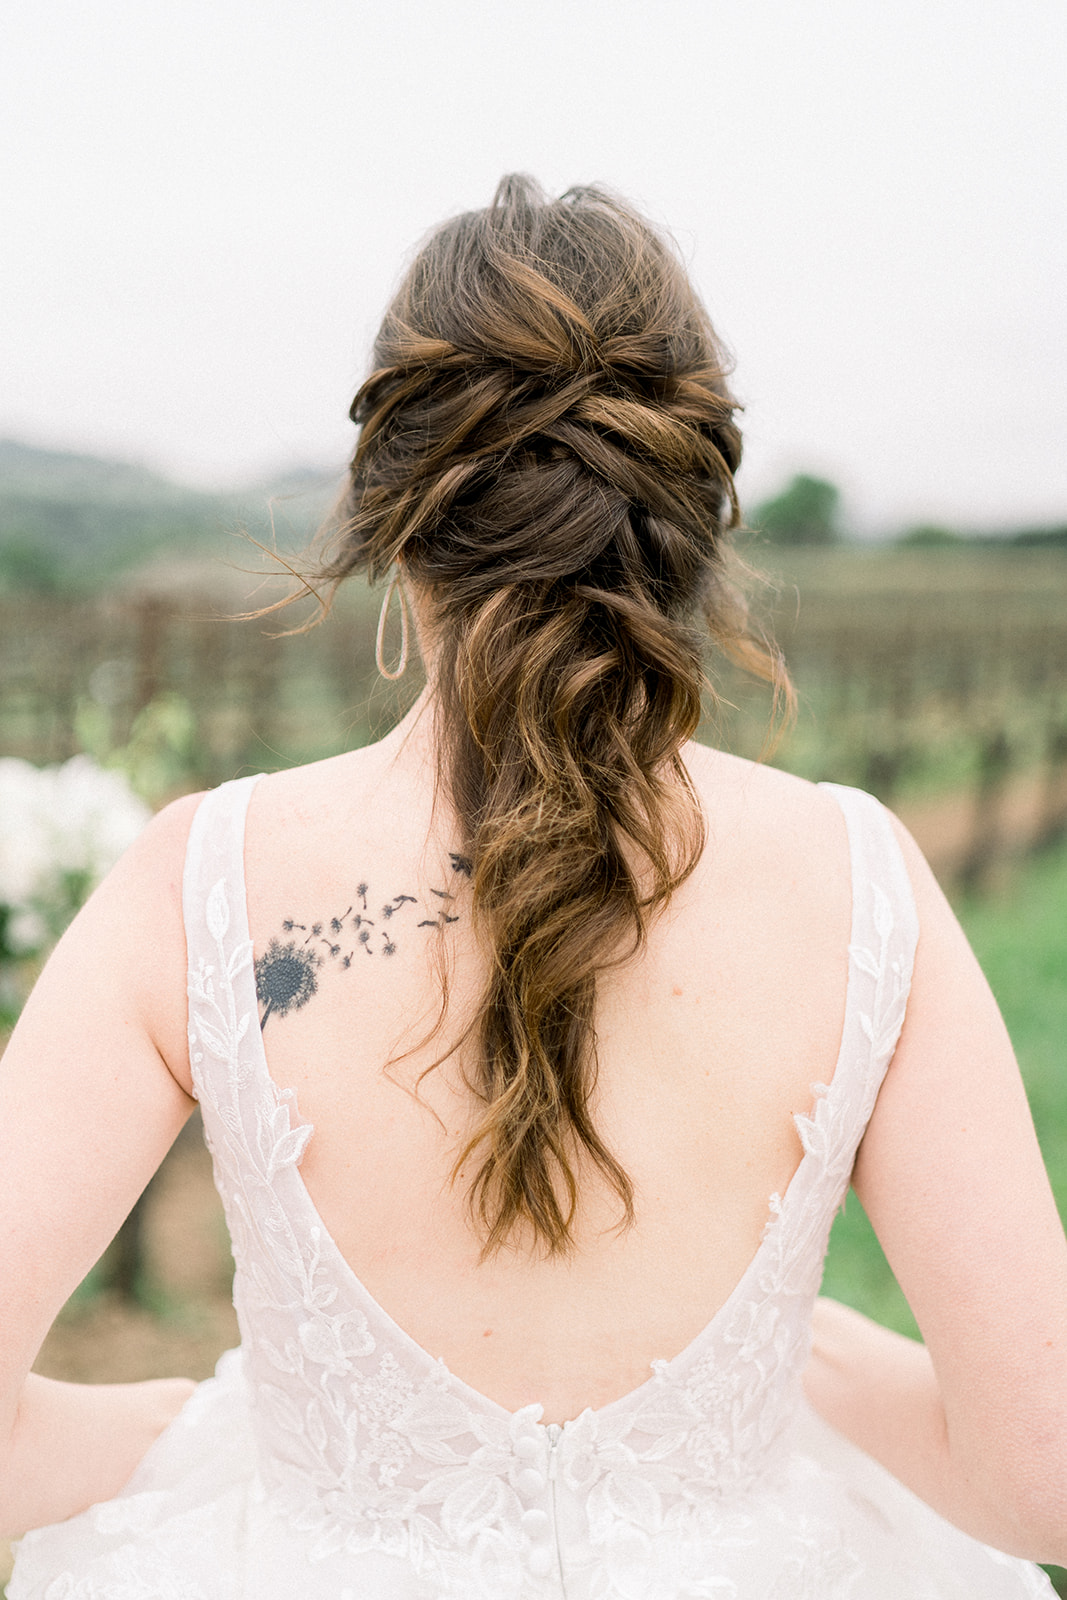 Bride's stunning updo with delicate hairpiece, photographed at Sunstone Winery by Tiffany Longeway, Southern California 